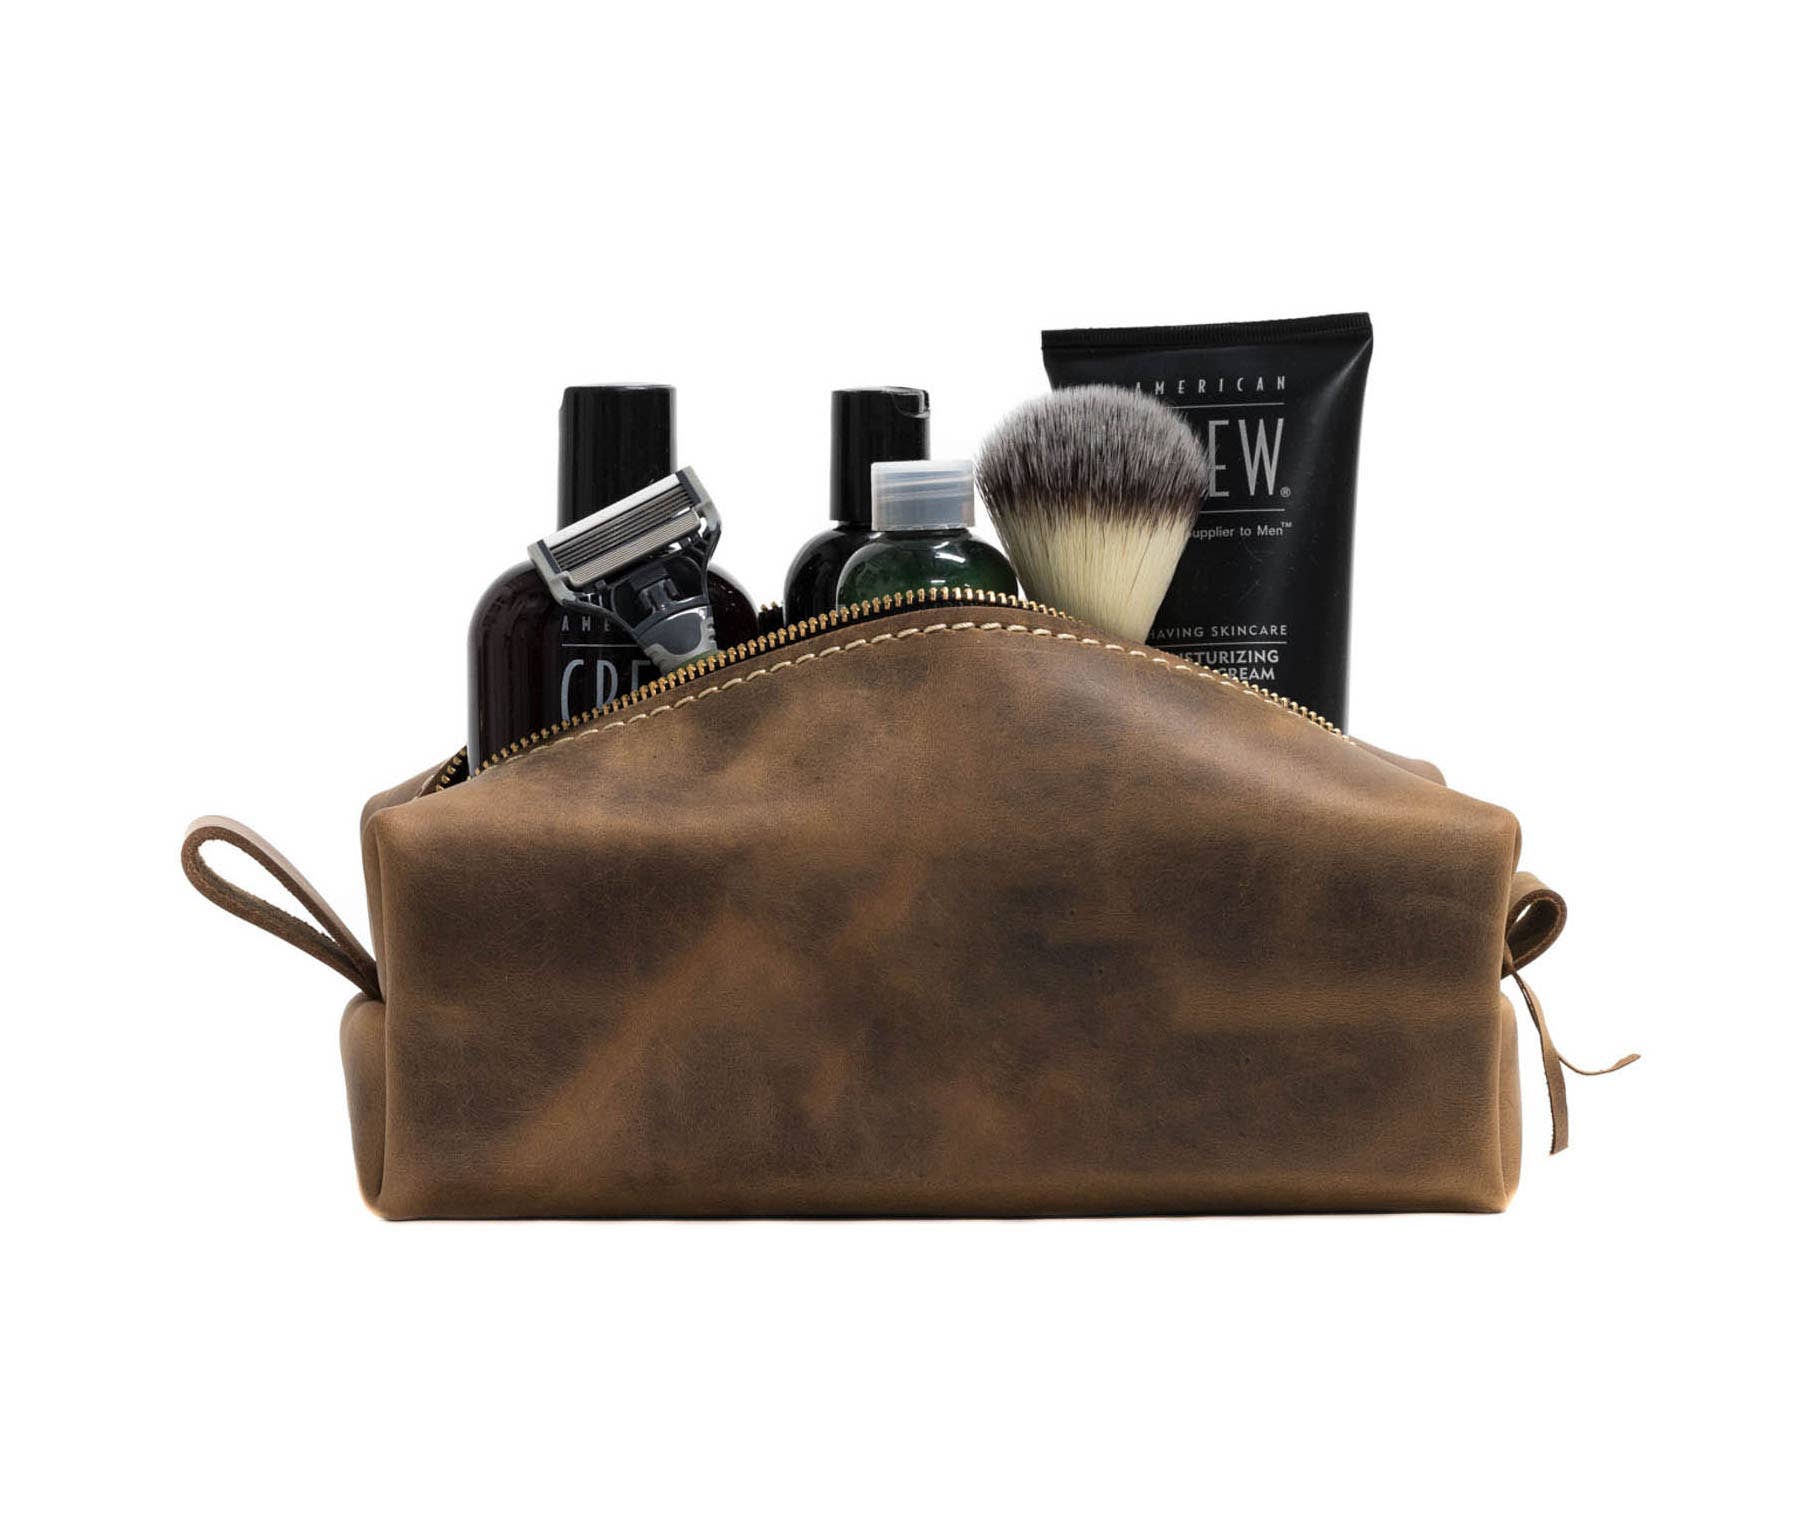 Leather dopp kit in Desert Sand color with items inside.